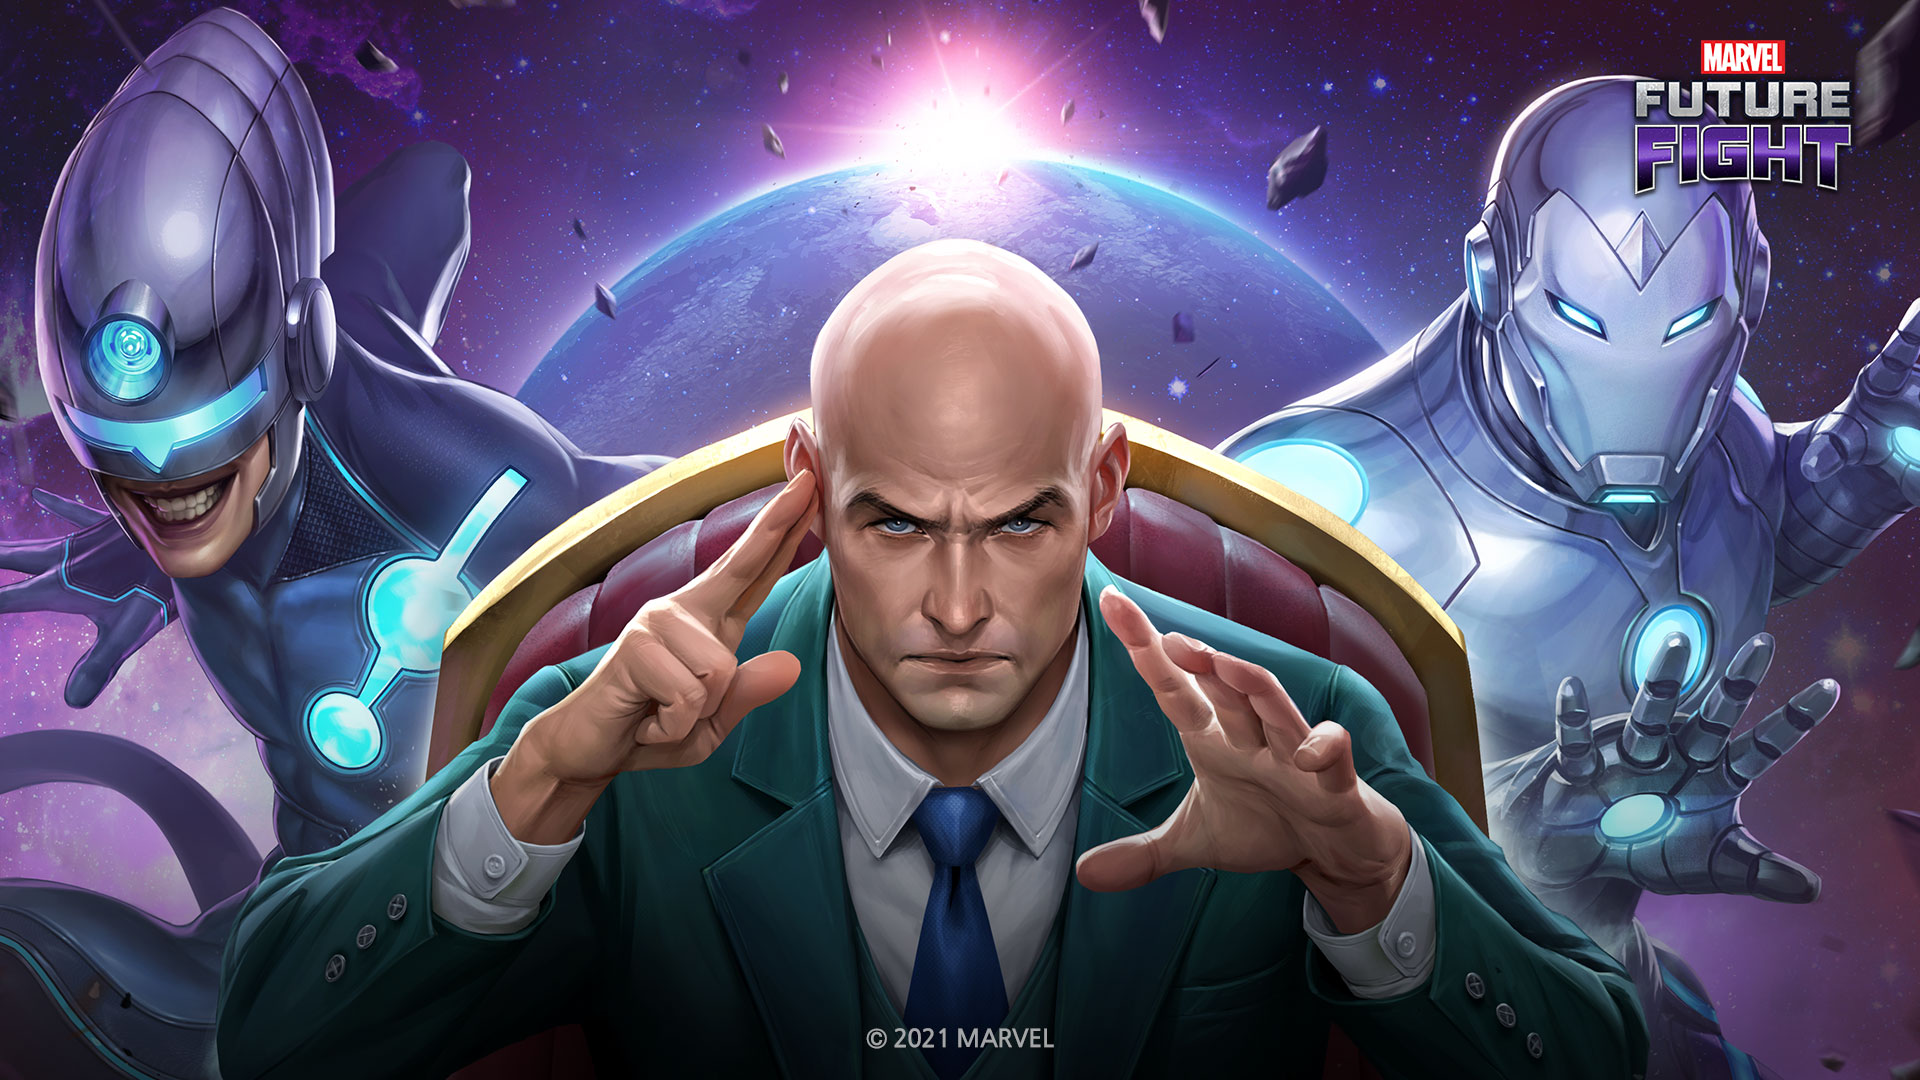 Marvel Future Fight Honors Its Sixth Anniversary With Celebratory Events Player Rewards And More